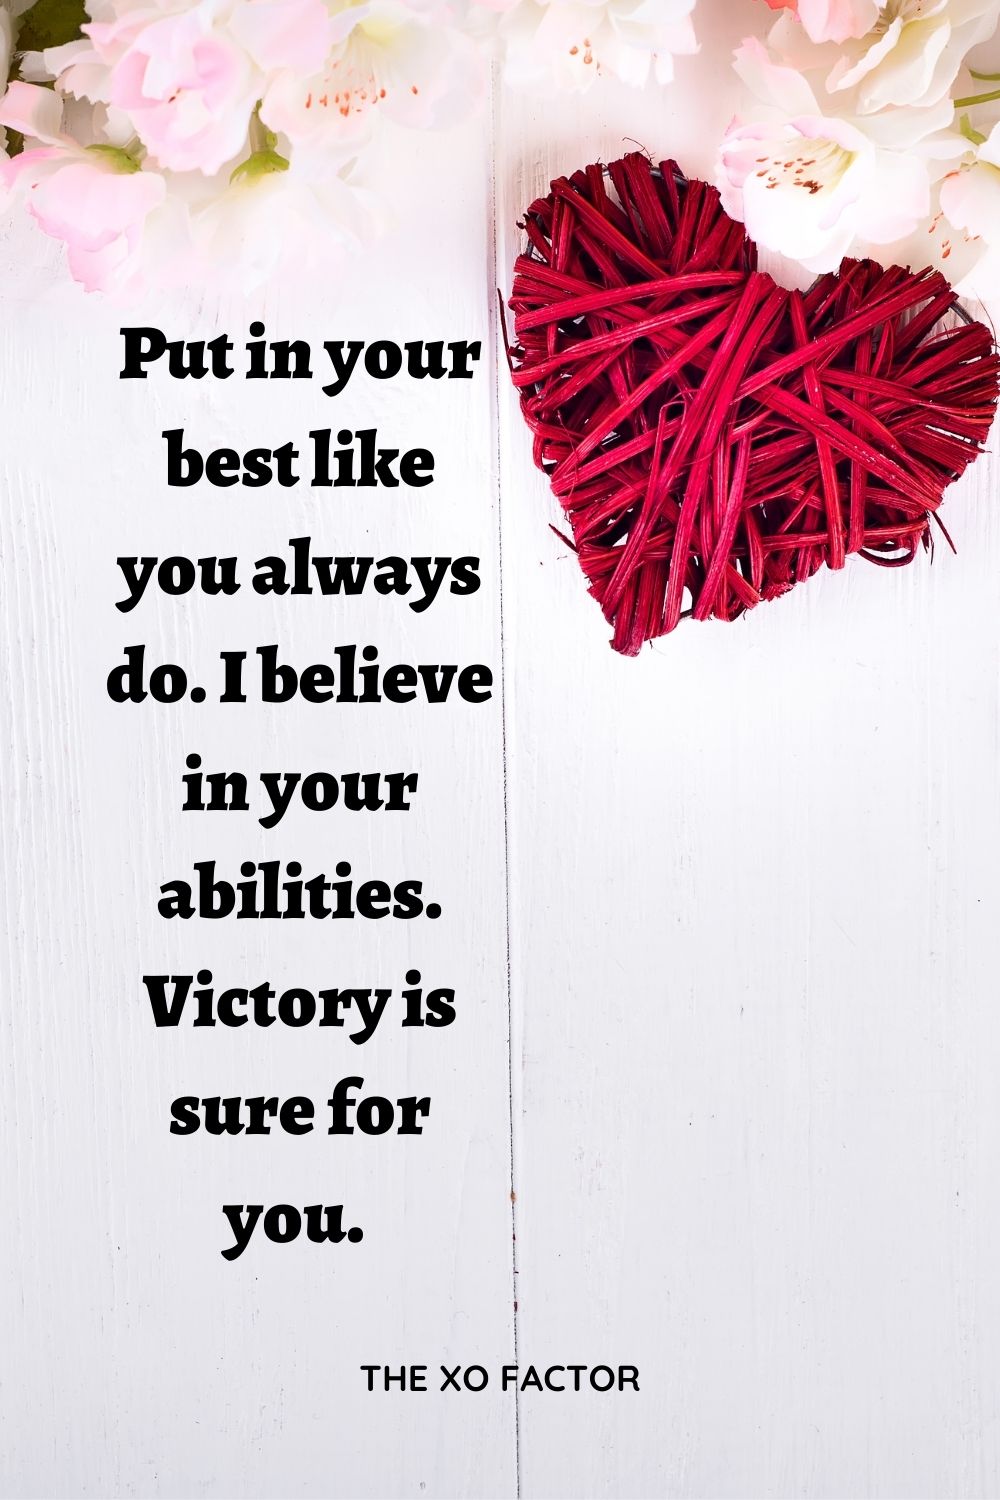 Put in your best like you always do. I believe in your abilities. Victory is sure for you.